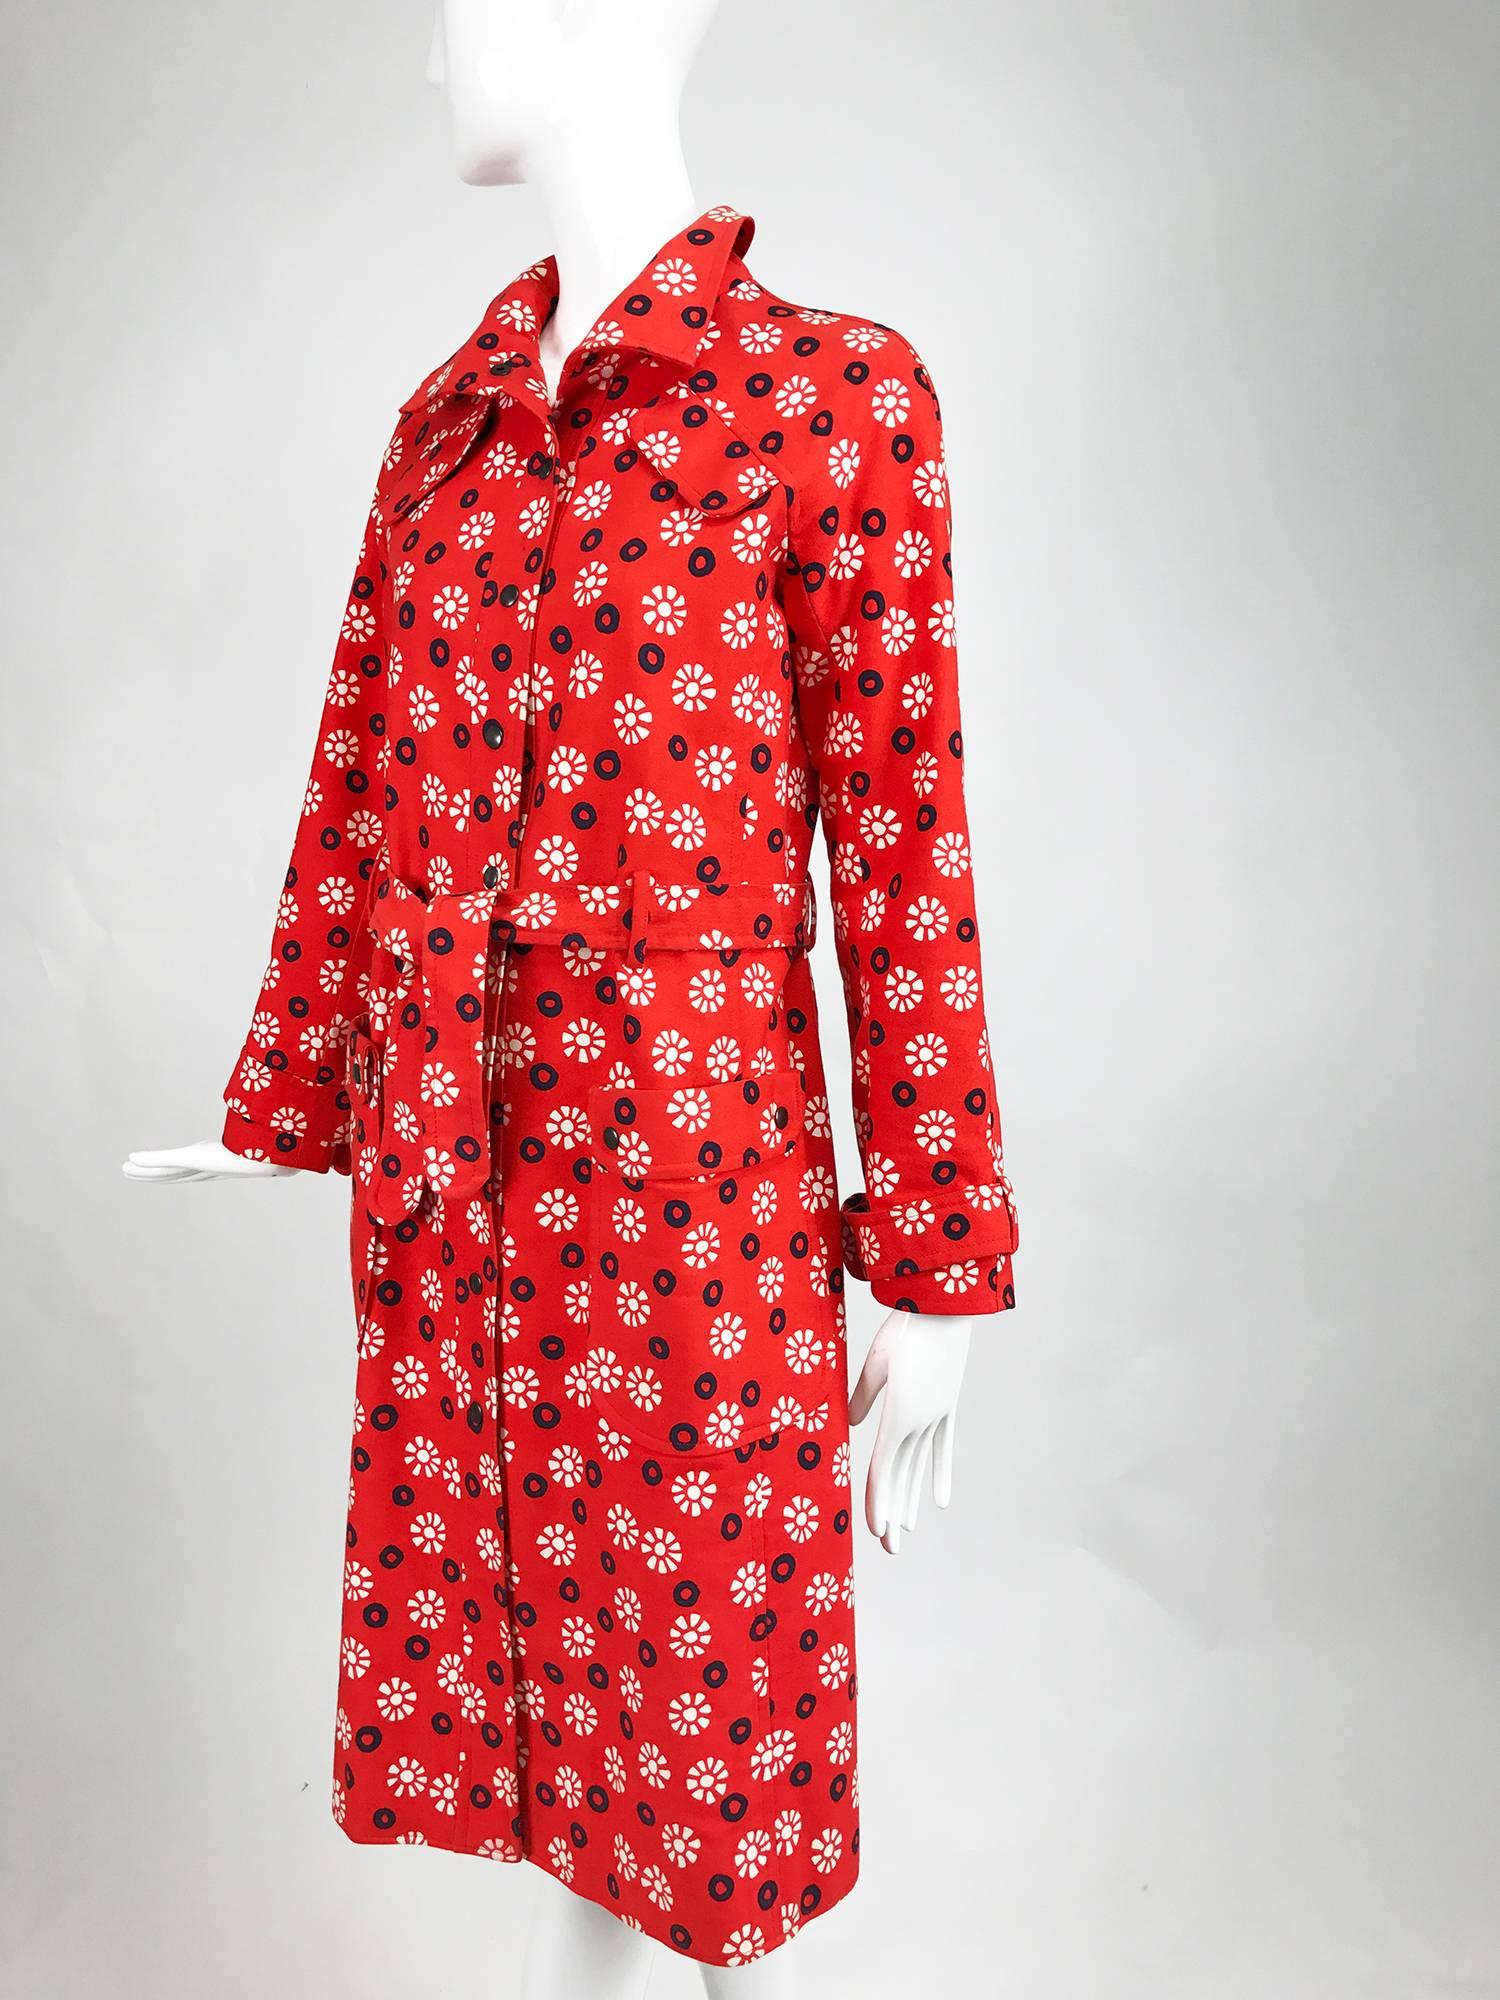 Ungaro Parallele red, white and navy blue with black center circles with white floral printed red cotton canvas trench coat from the late 1960s. Black snap front coat has a self tie belt, shoulder flaps at the front, 2 hip front patch pockets with